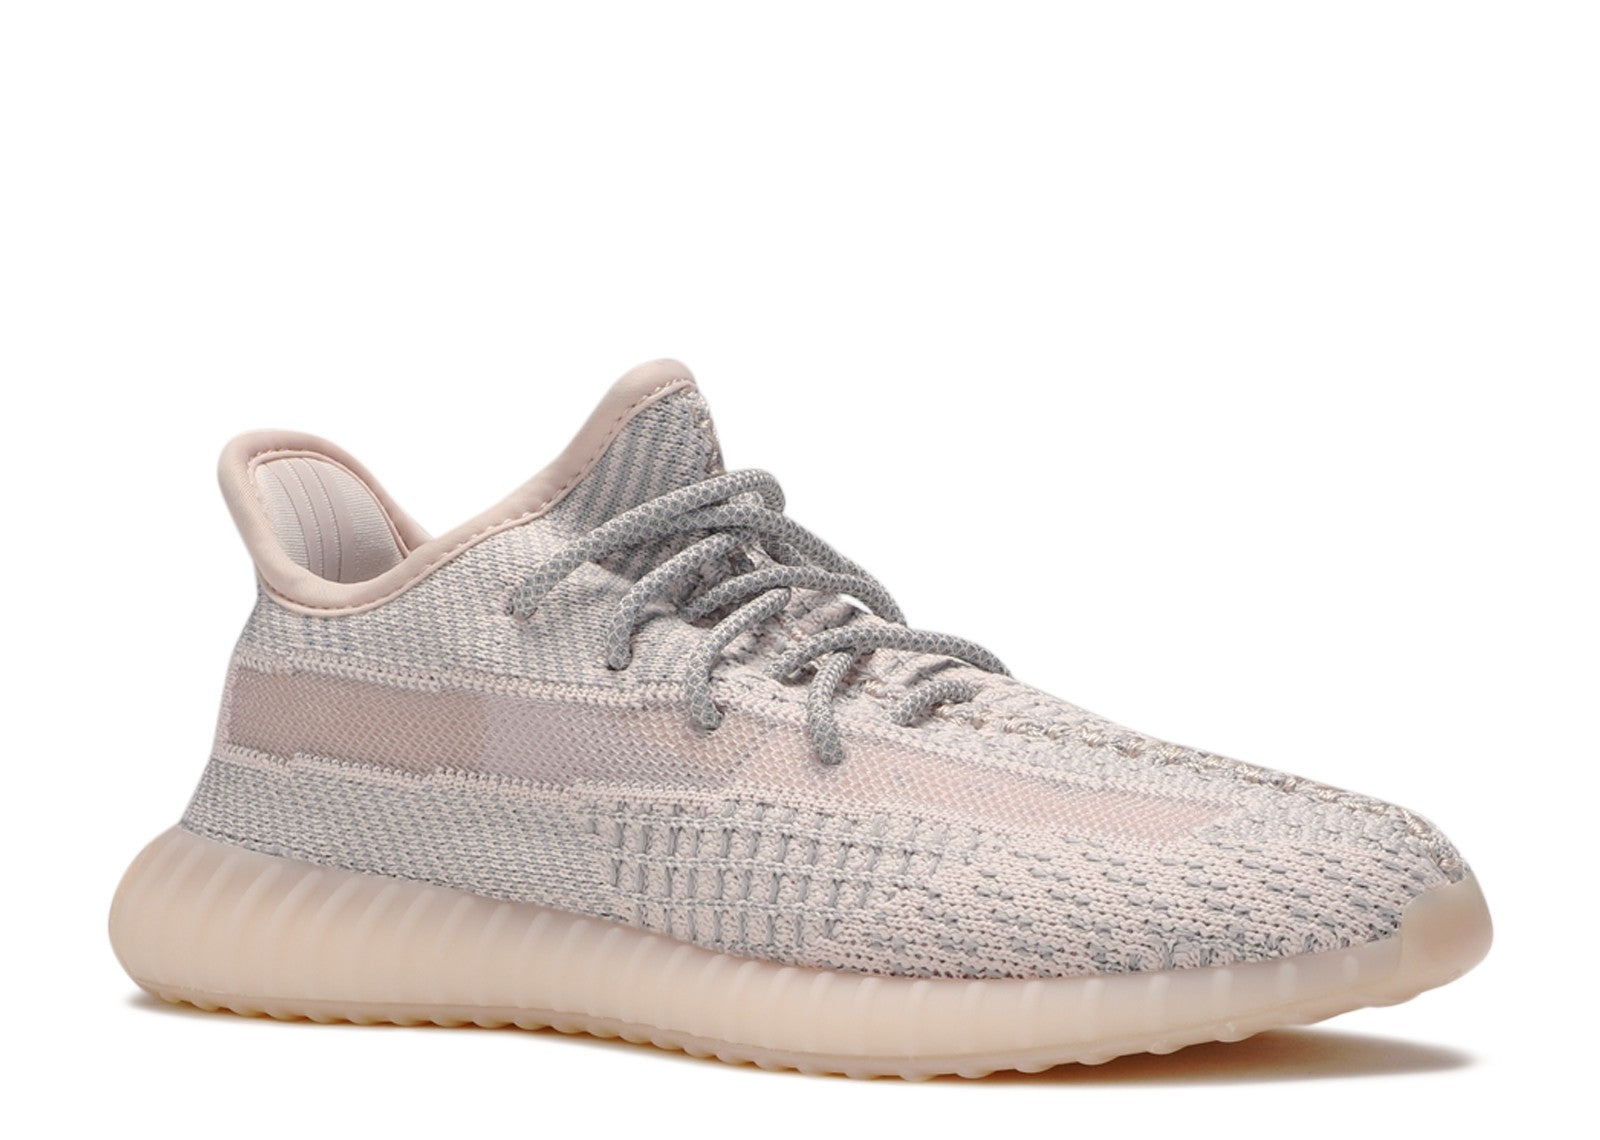 Adidas Yeezy Boost 350 V2 Kids 'Synth'